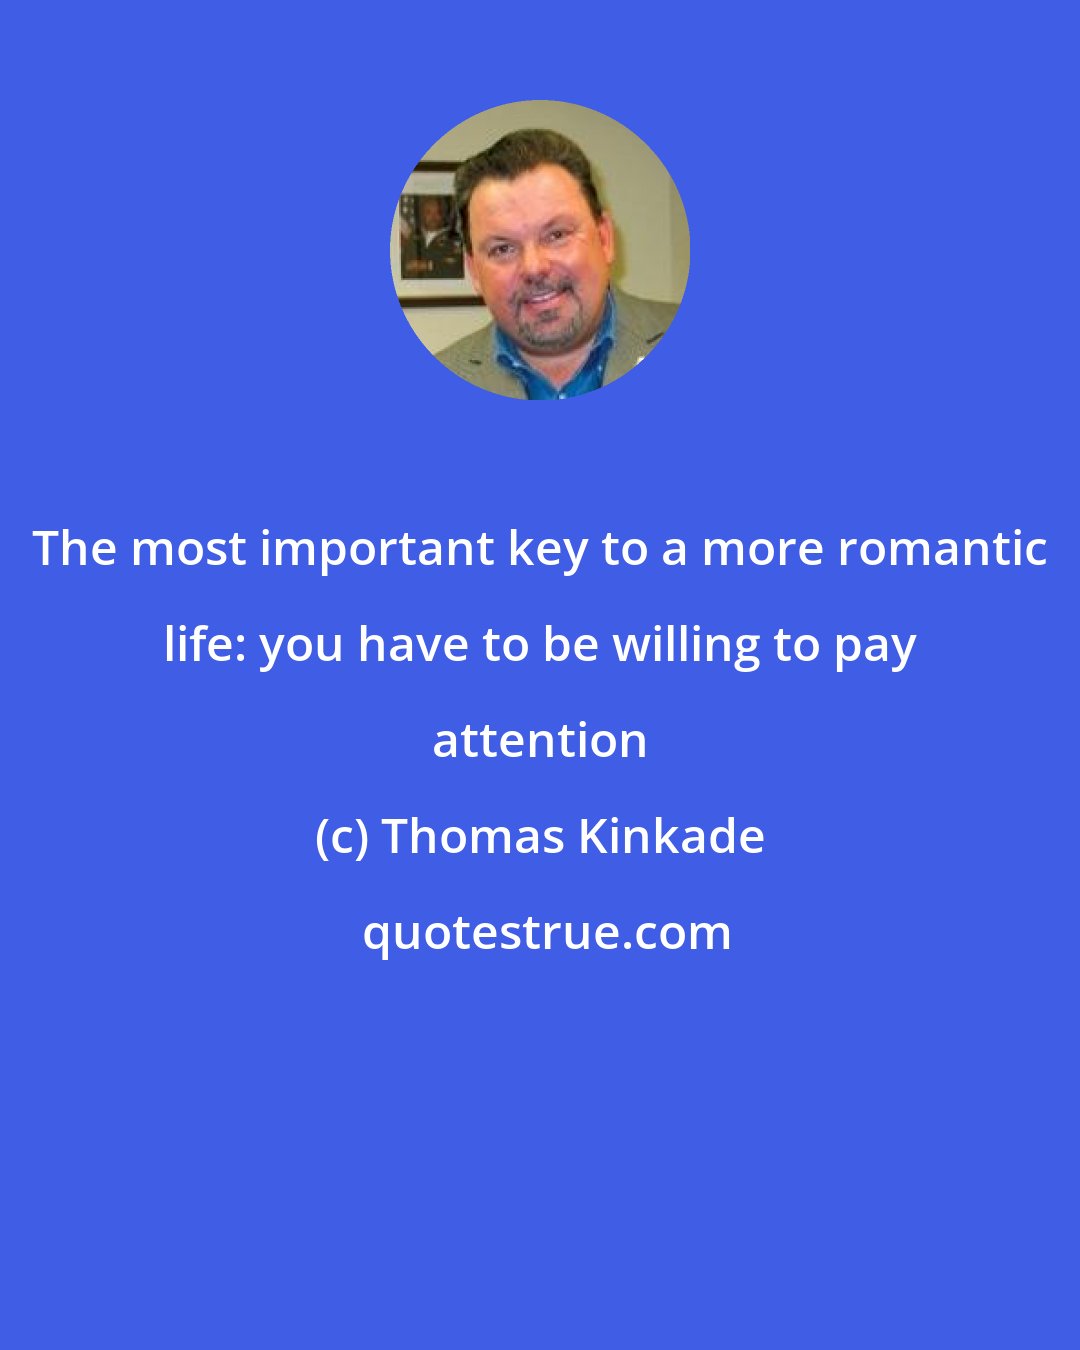 Thomas Kinkade: The most important key to a more romantic life: you have to be willing to pay attention